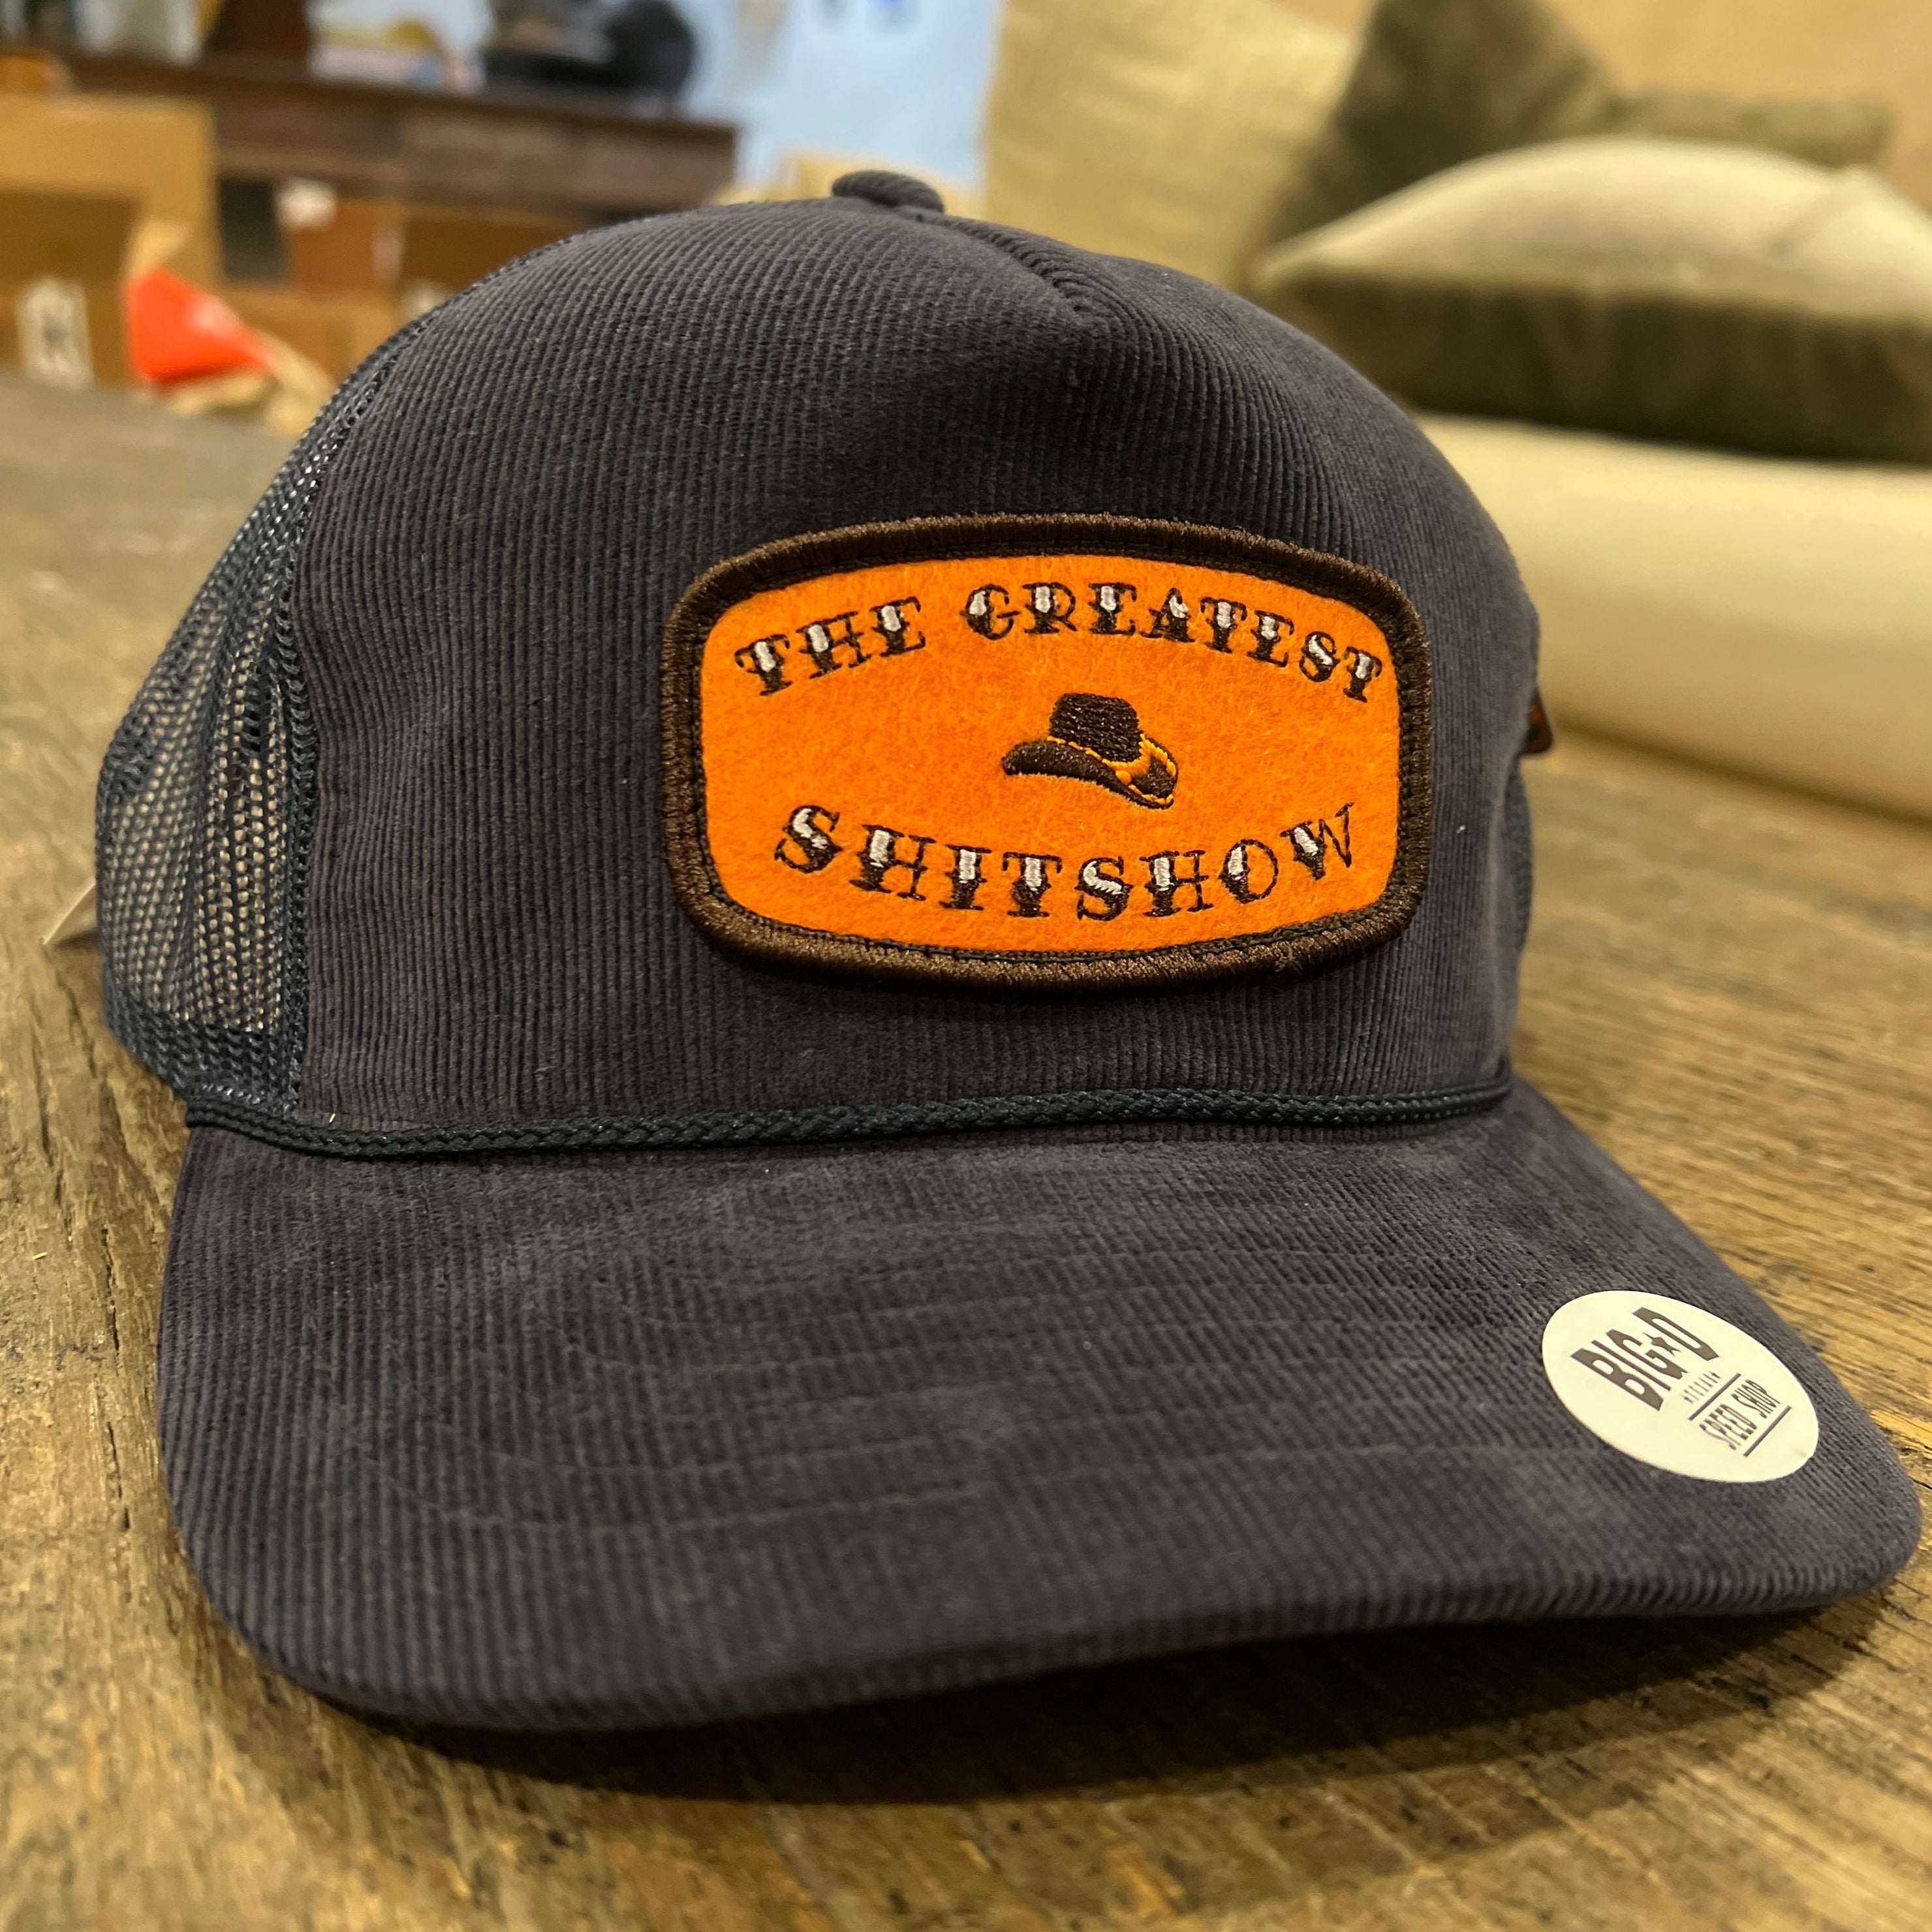 The Greatest $h!t$how - Orange Patch on Navy Corduroy Trucker